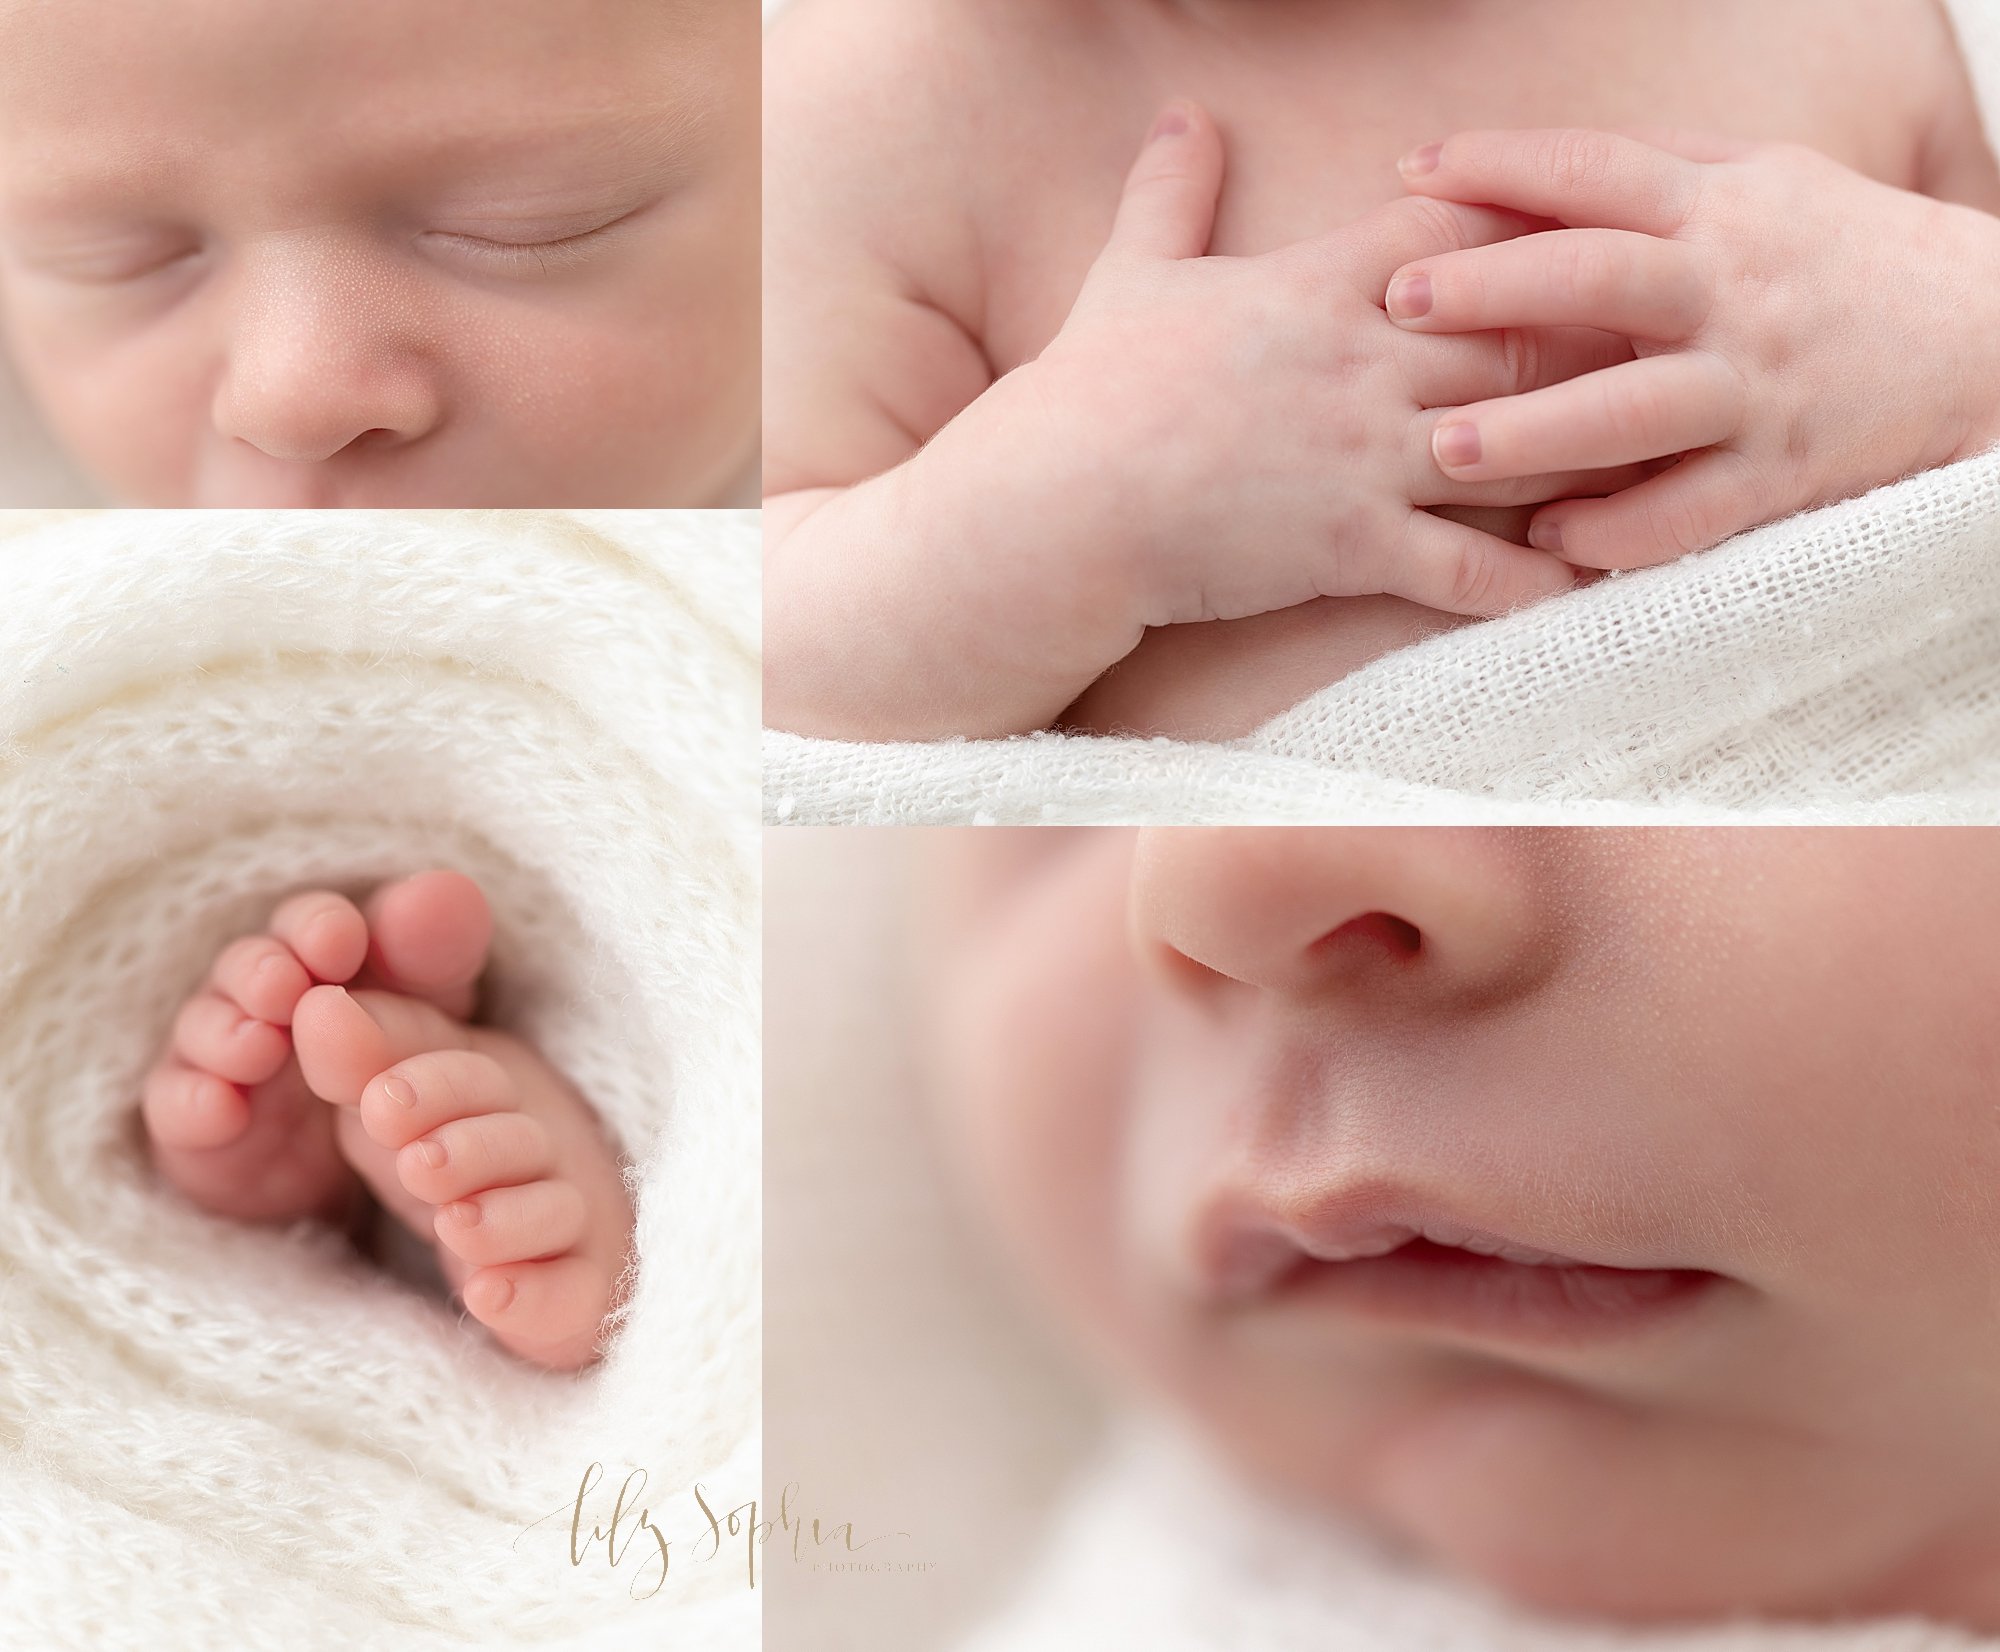  Newborn photo collage of the features of a newborn baby boy —his button nose, his tiny toes peeking out from a soft white crocheted blanket, his hands folded over his chest and his milky lips taken near Sandy Springs in Atlanta in a natural light st